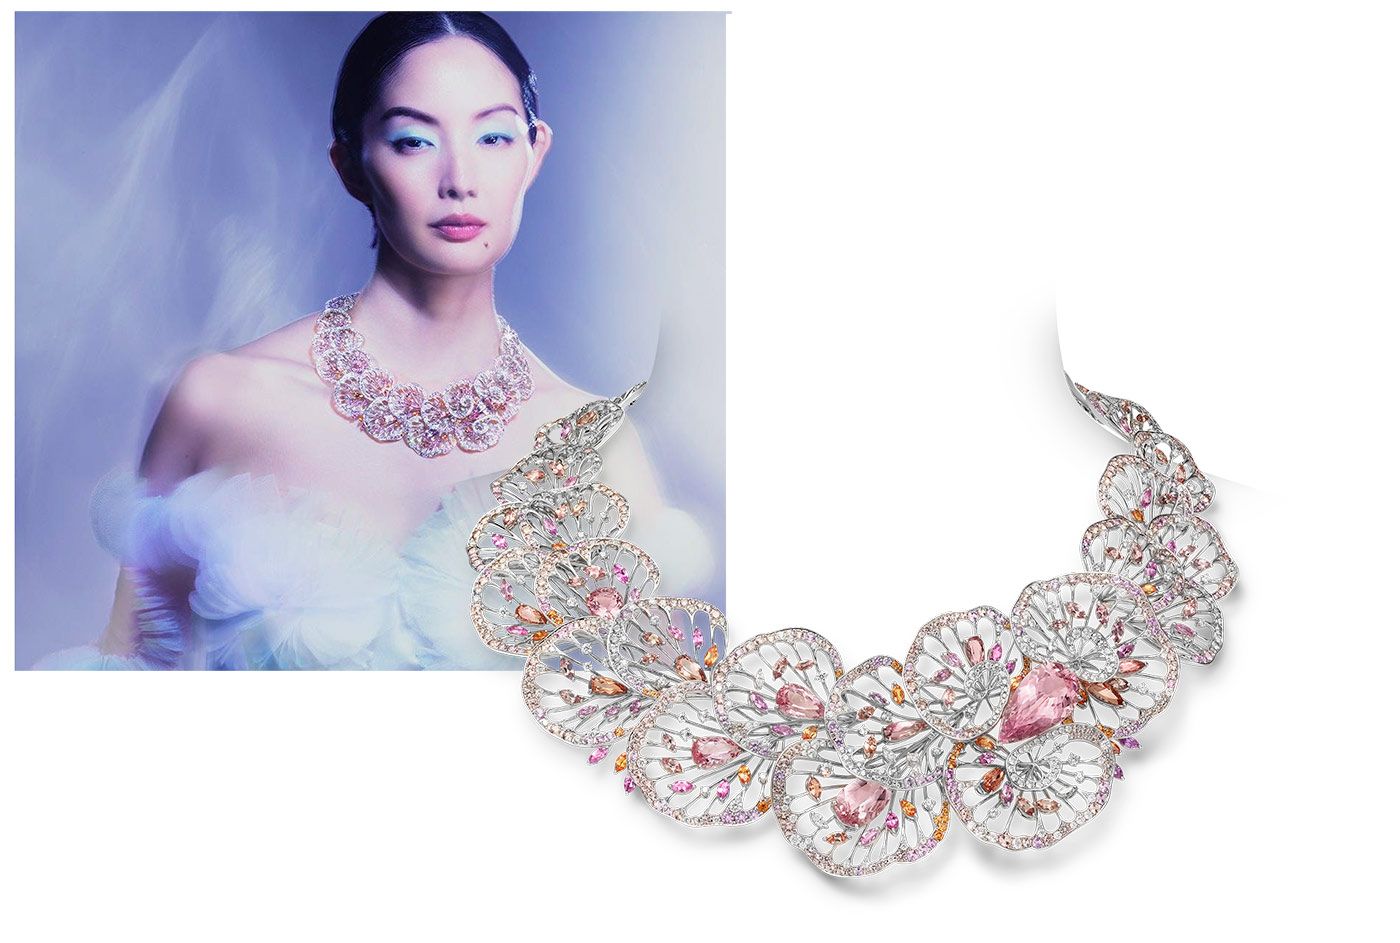 Mikimoto Coral high jewellery necklace in white gold, morganite, topaz, garnet, sapphire and diamond from the Praise to the Sea collection